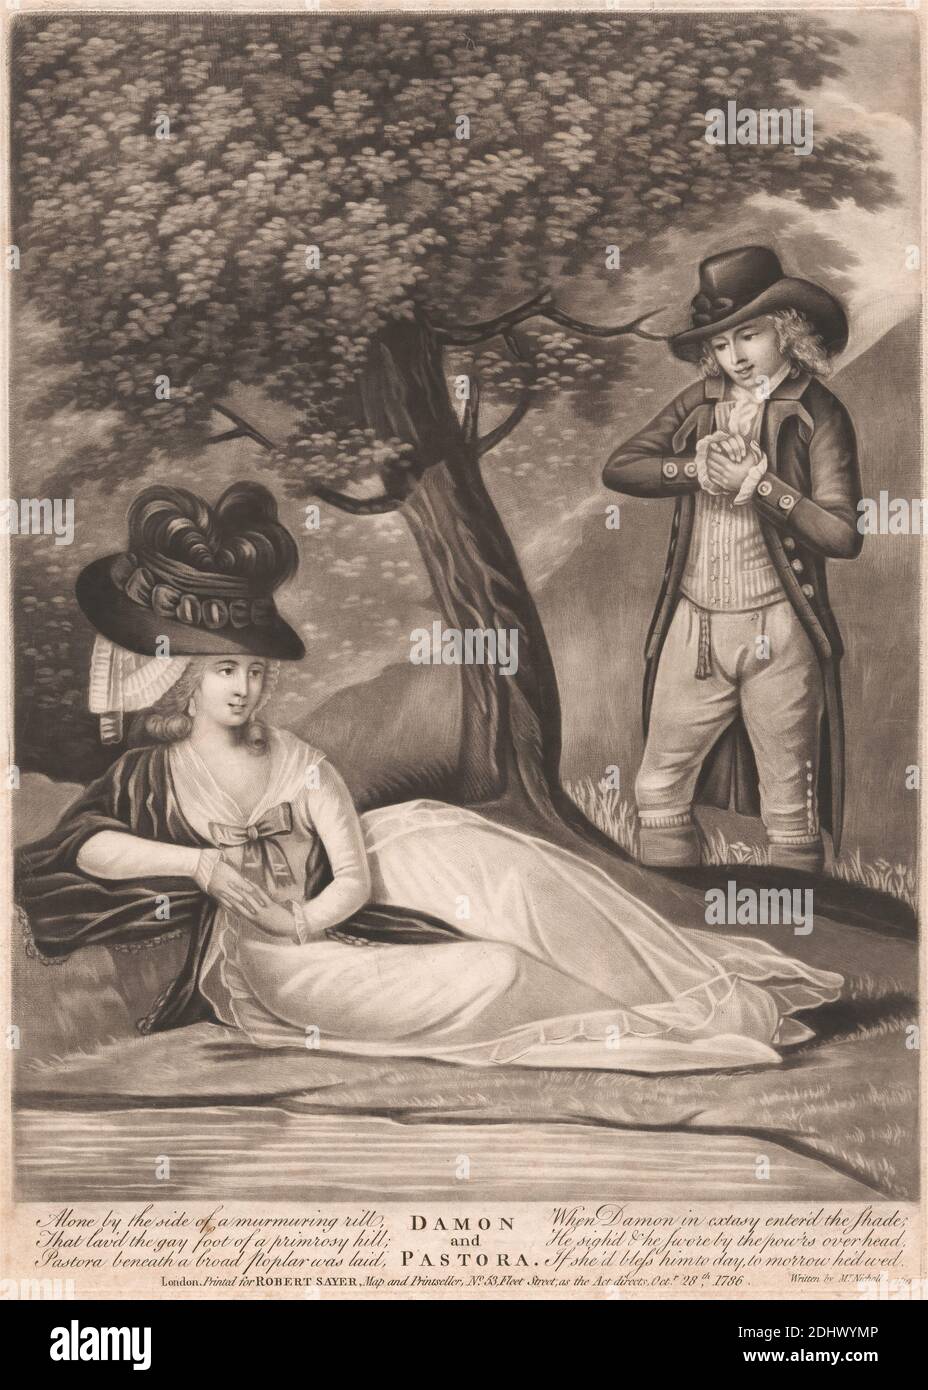 Damon and Pastora, Print made by unknown artist, eighteenth century, Published by Robert Sayer, 1725–1794, British, 1786, Mezzotint on medium, slightly textured, cream laid paper, Sheet: 15 7/8 × 11 1/2 inches (40.3 × 29.2 cm), Plate: 14 × 9 7/8 inches (35.6 × 25.1 cm), and Image: 13 × 9 7/8 inches (33 × 25.1 cm Stock Photo